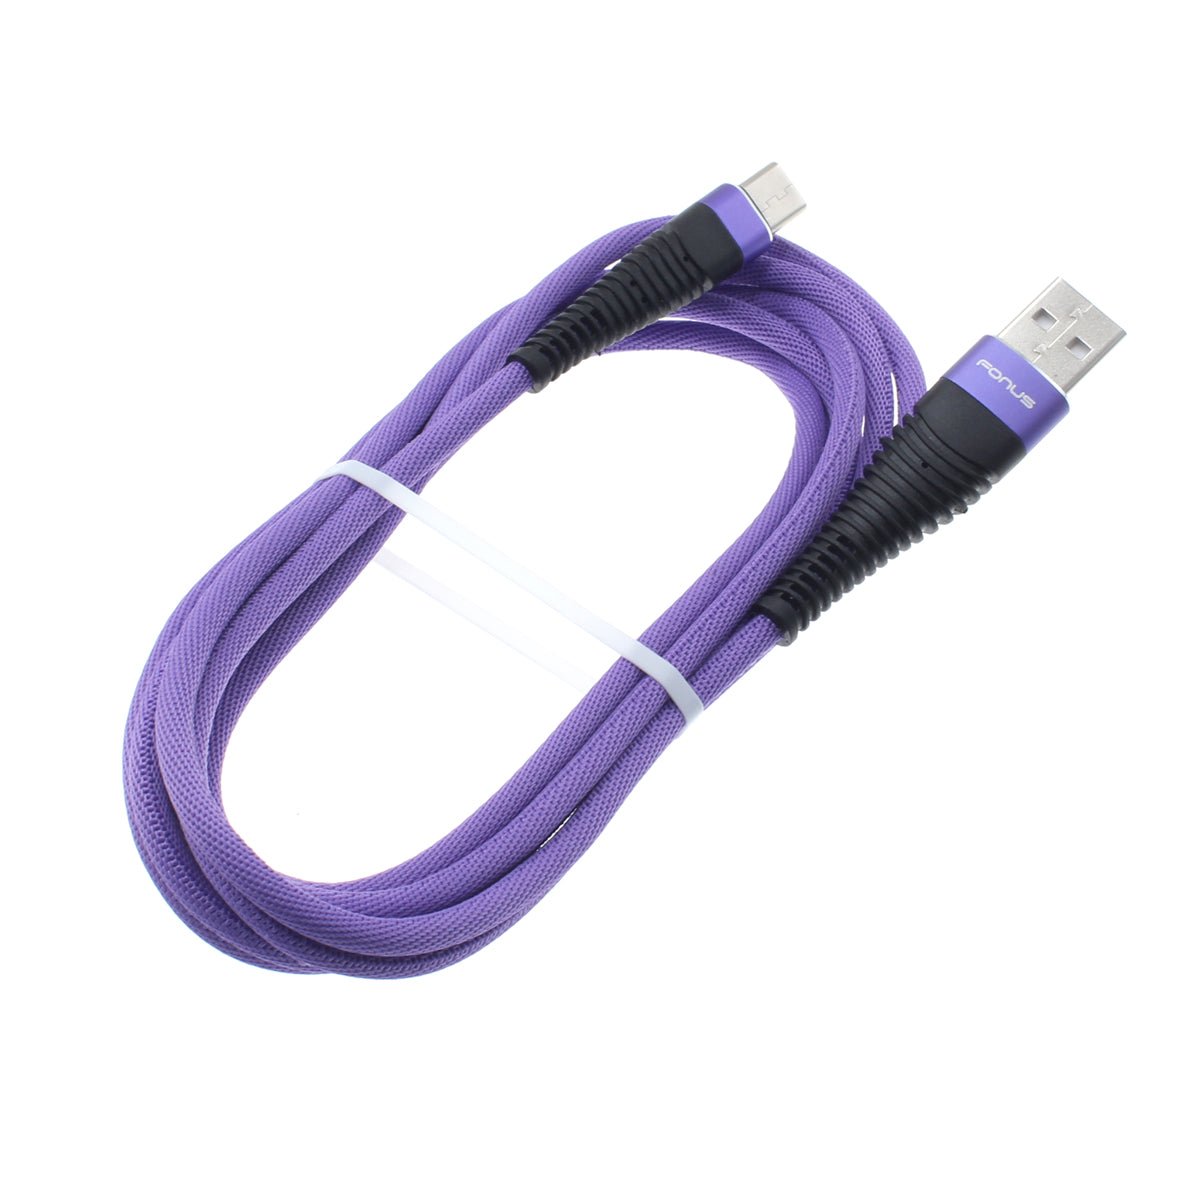 6ft USB Cable, Wire Power Charger Cord Type-C Purple - NWR91